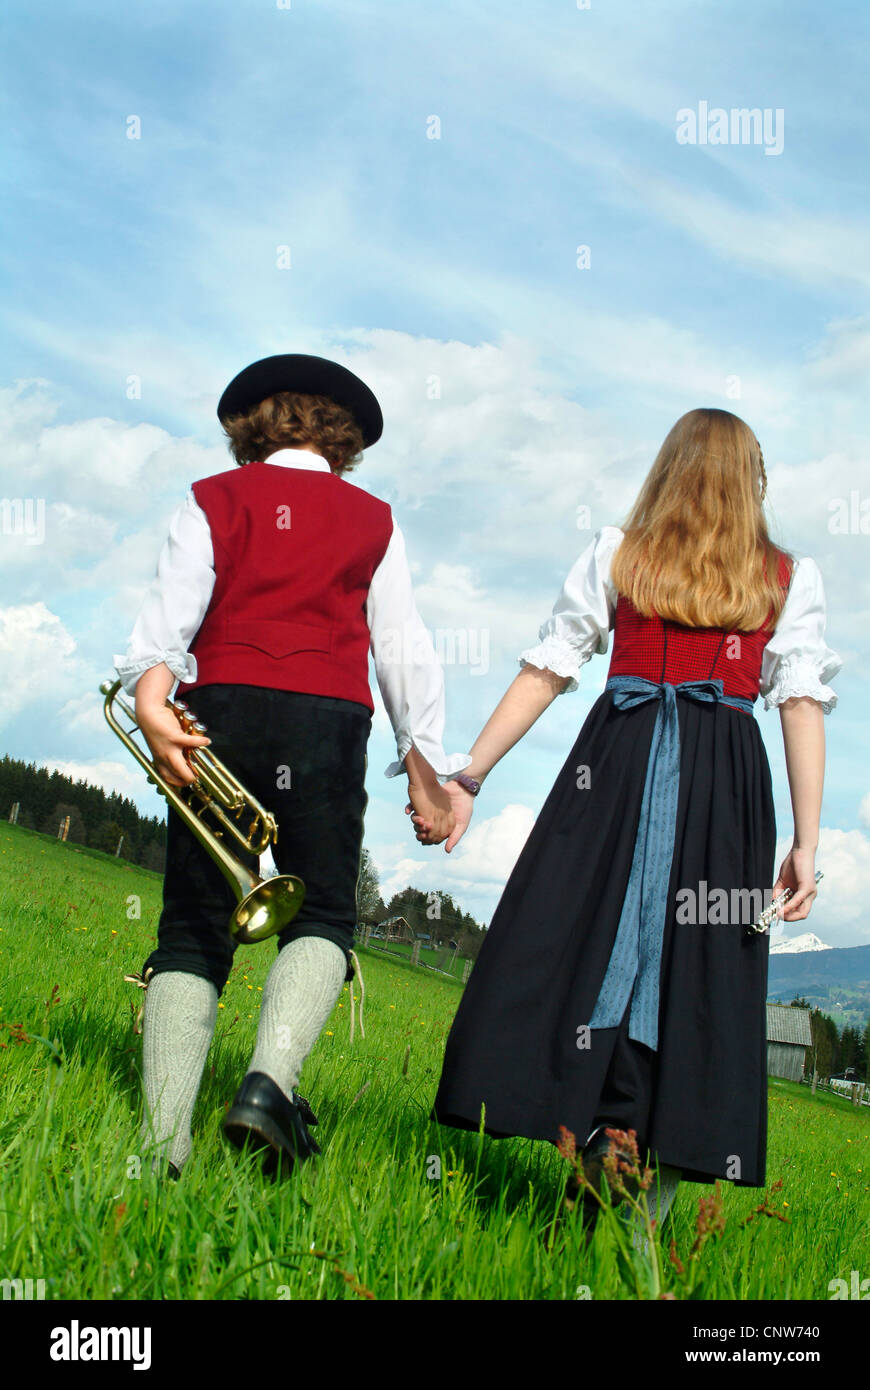 two children in traditional costumes and with musical instruments walking through a meadow hand in hand Stock Photo